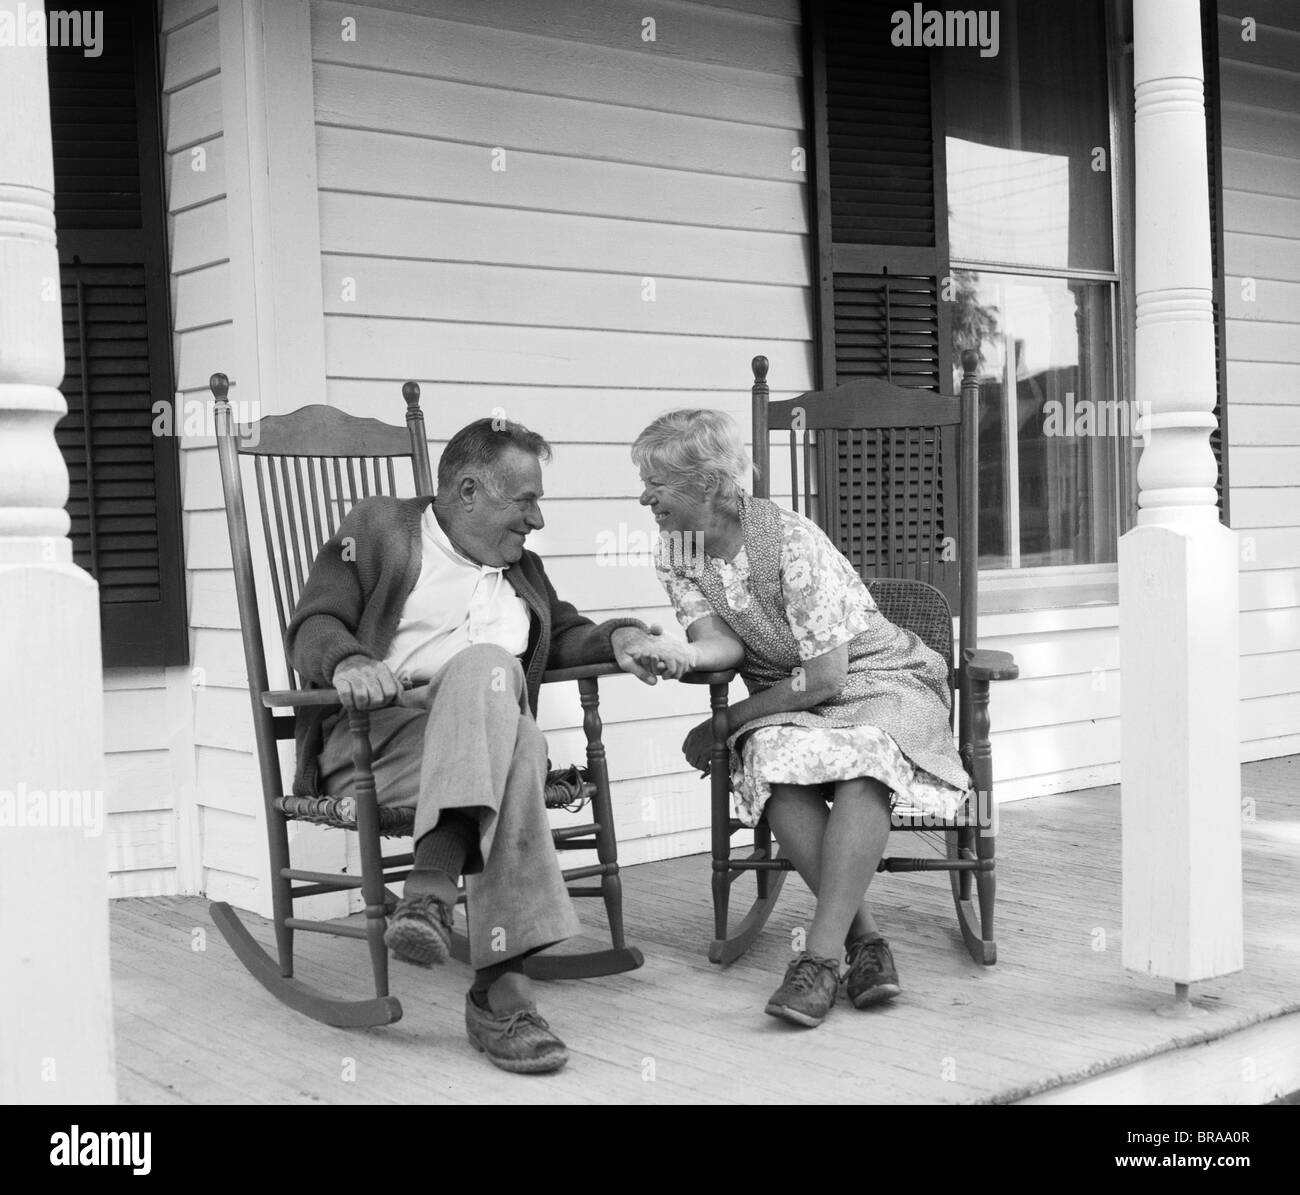 1970s ELDERLY COUPLE IN ROCKING CHAIRS ON PORCH HOLDING HANDS Stock Photo